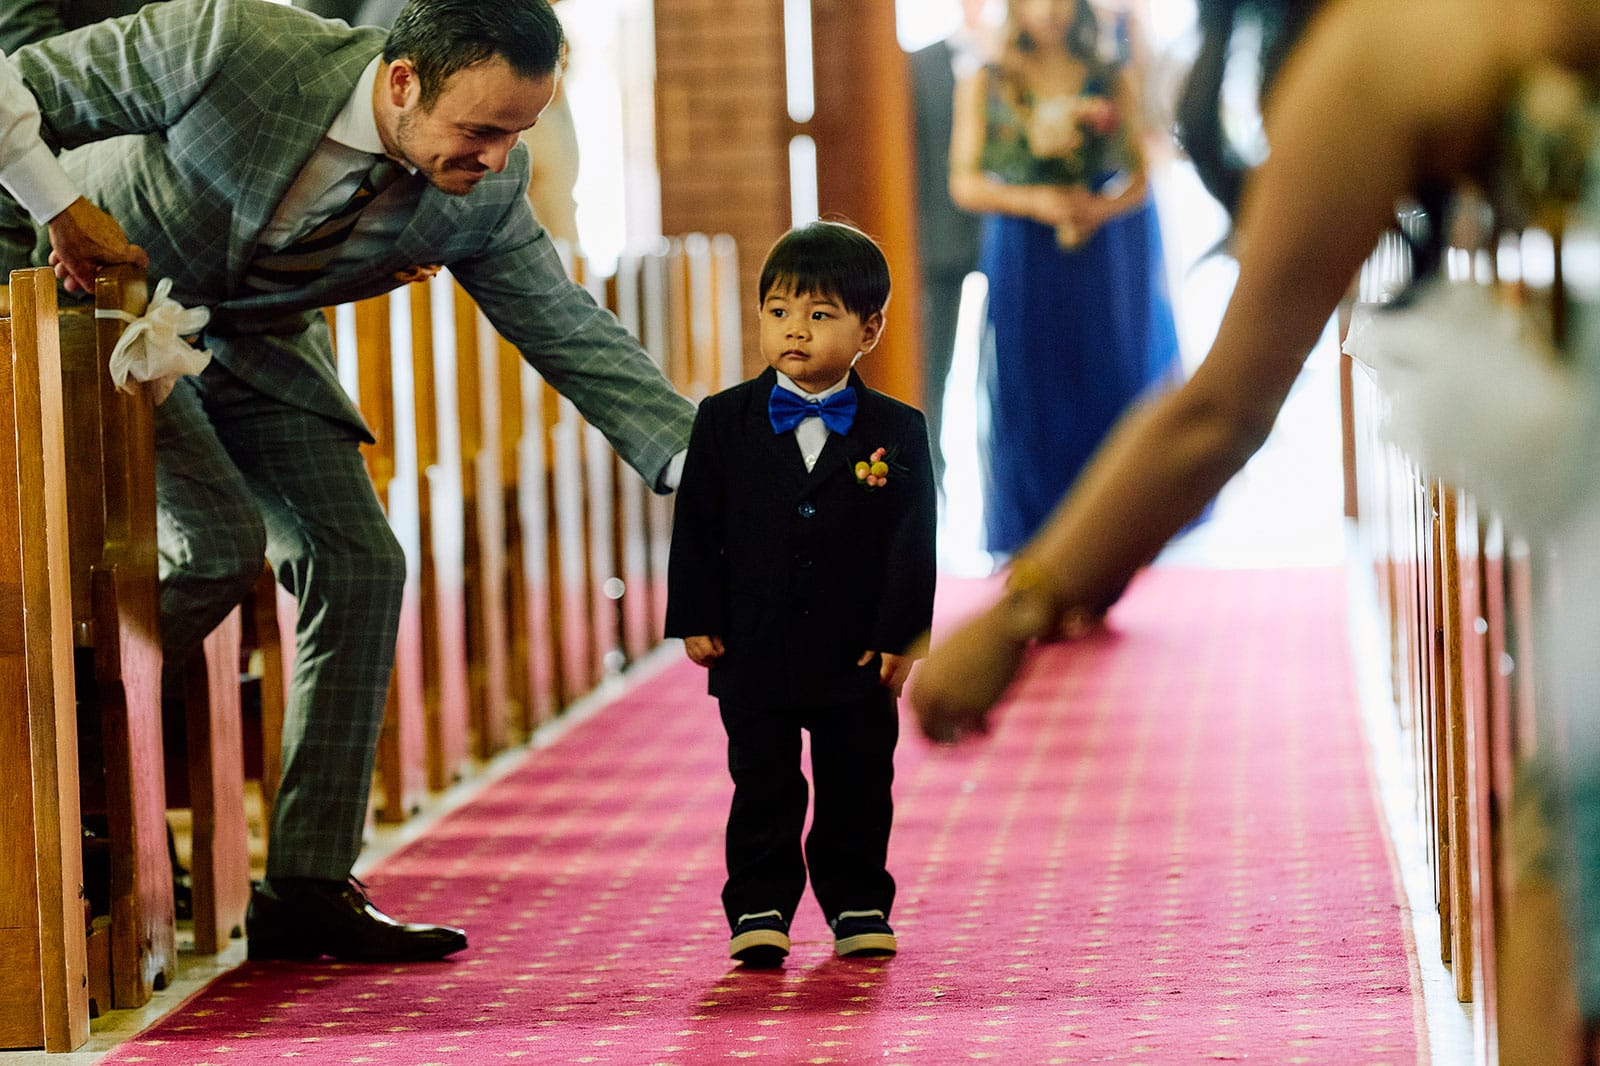 Giving the page boy a helping hand up the aisle